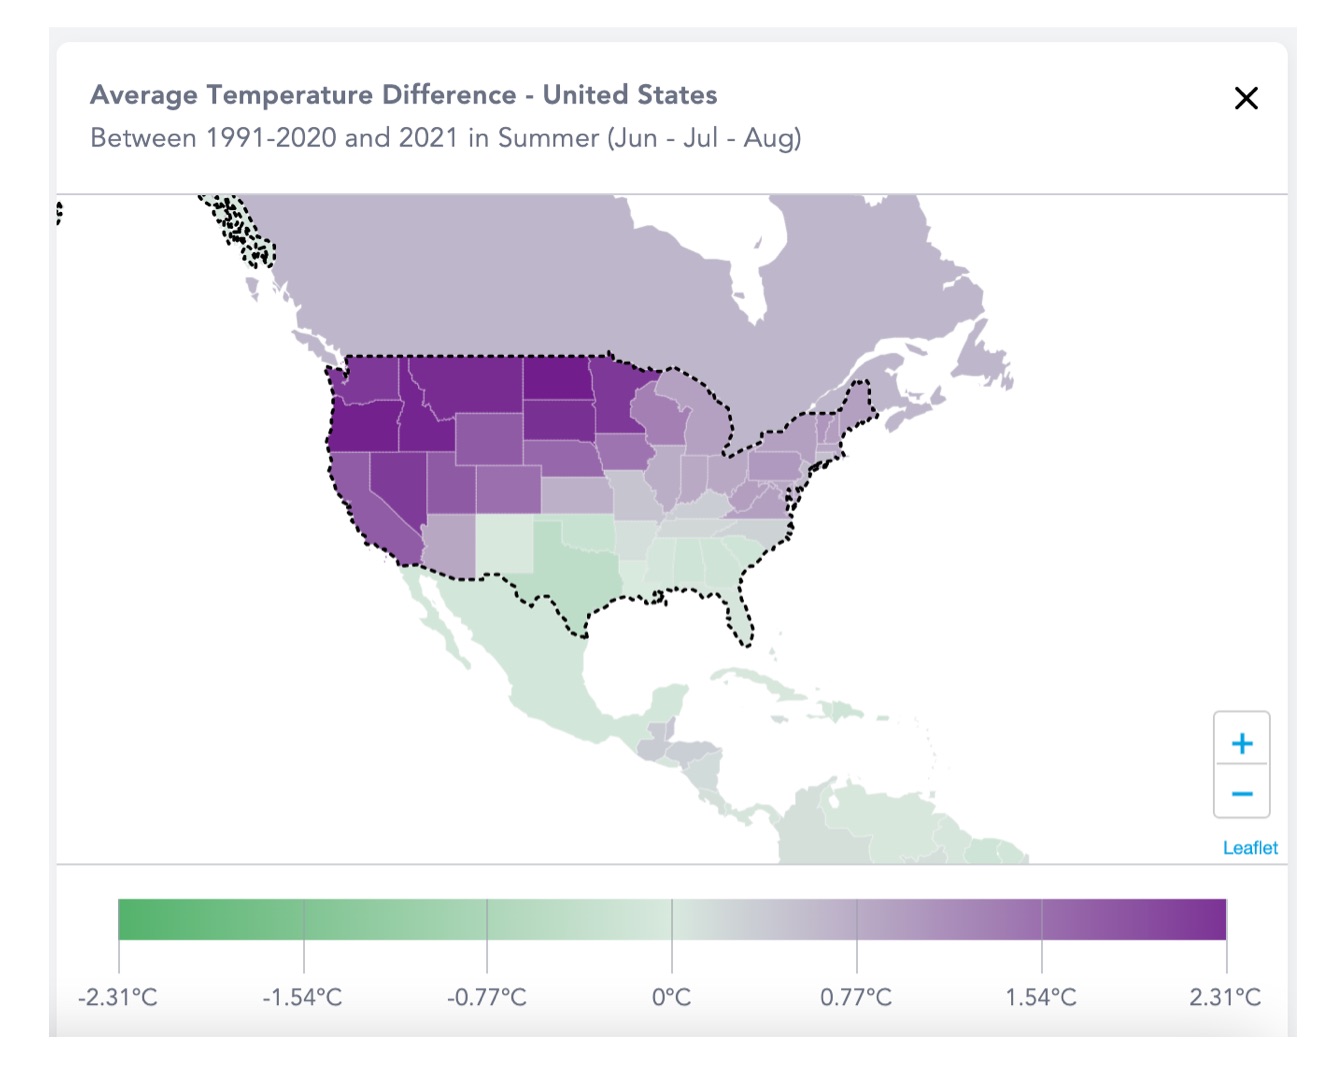 Climate - Average temperature difference, United States